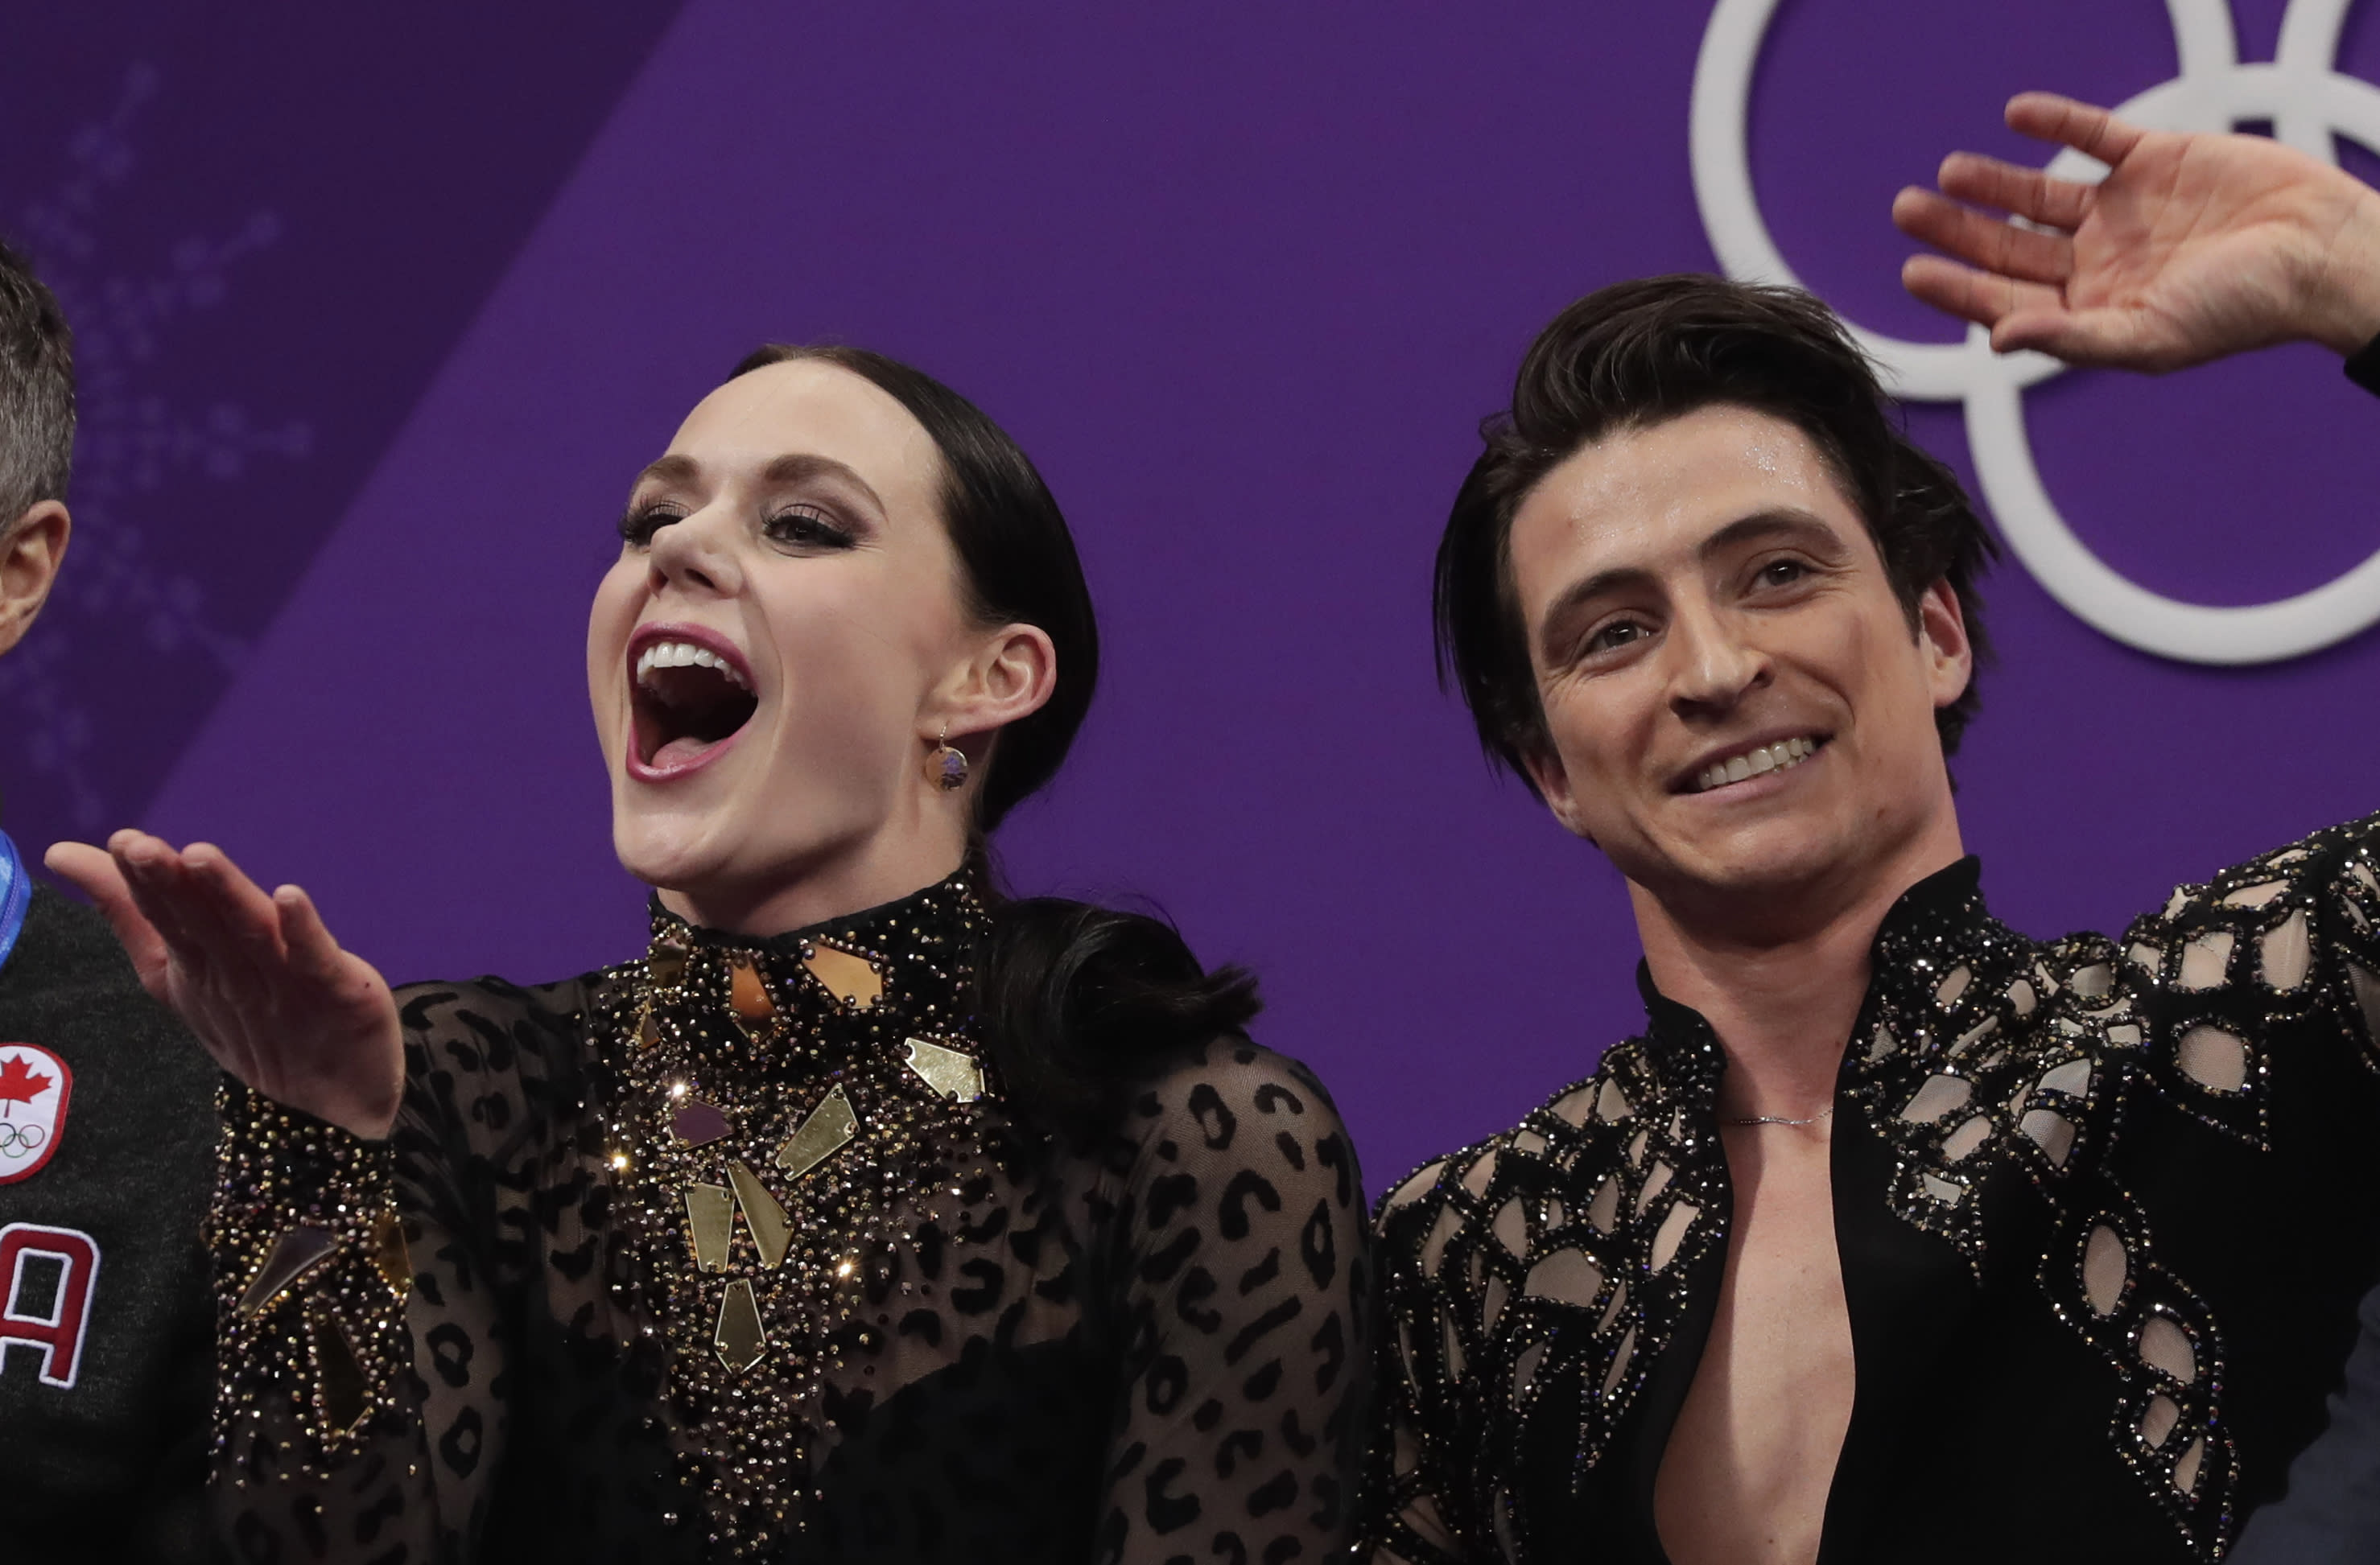 What Tessa Virtue and Scott Moir like about each other